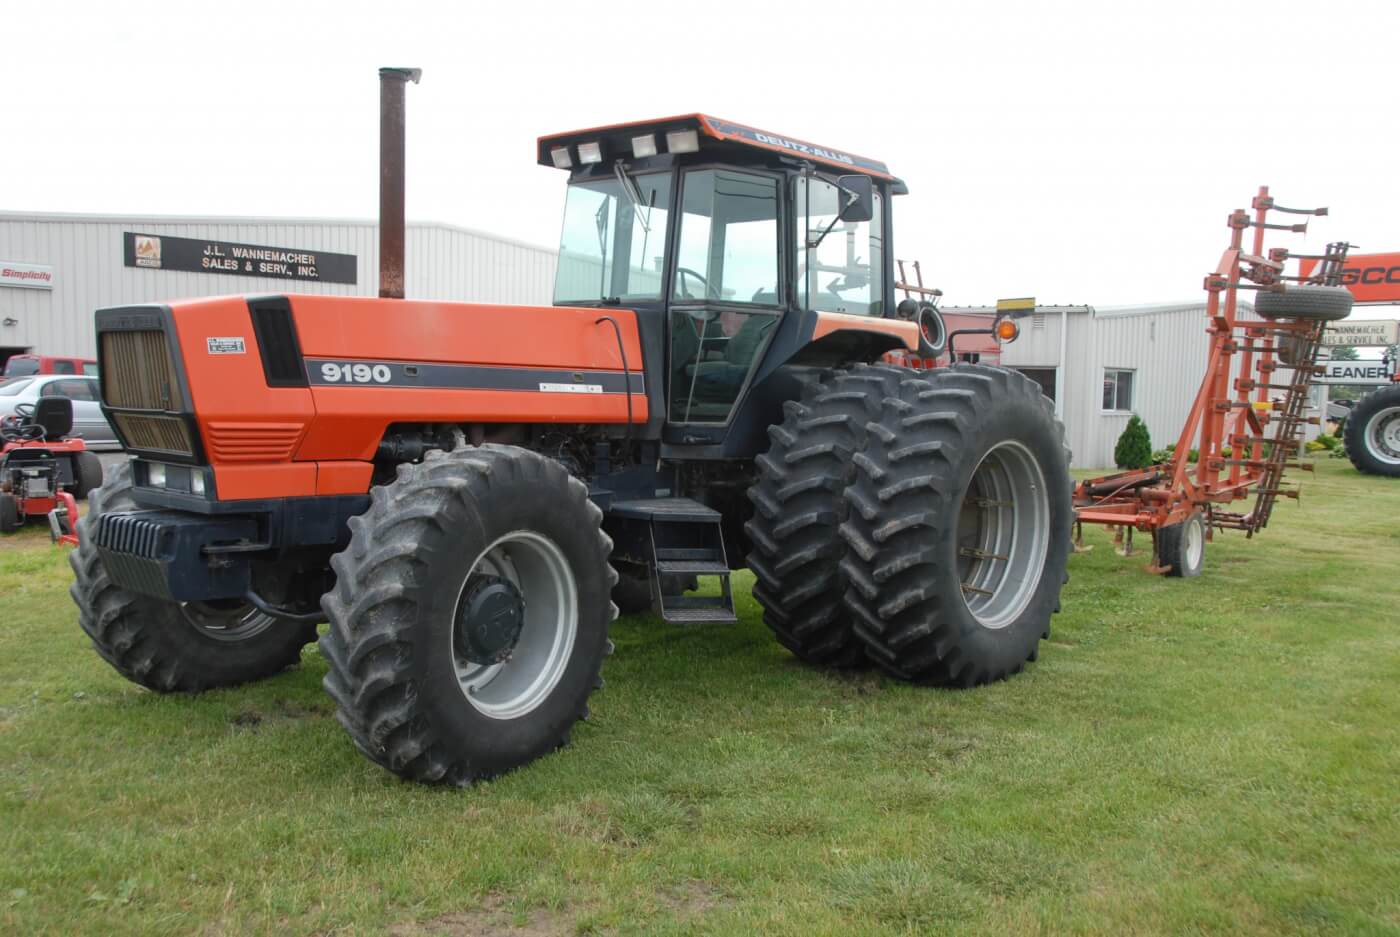 ... seen here on AGCO Dealer J.L. Wannamacher’s lot in Ottoville, Ohio